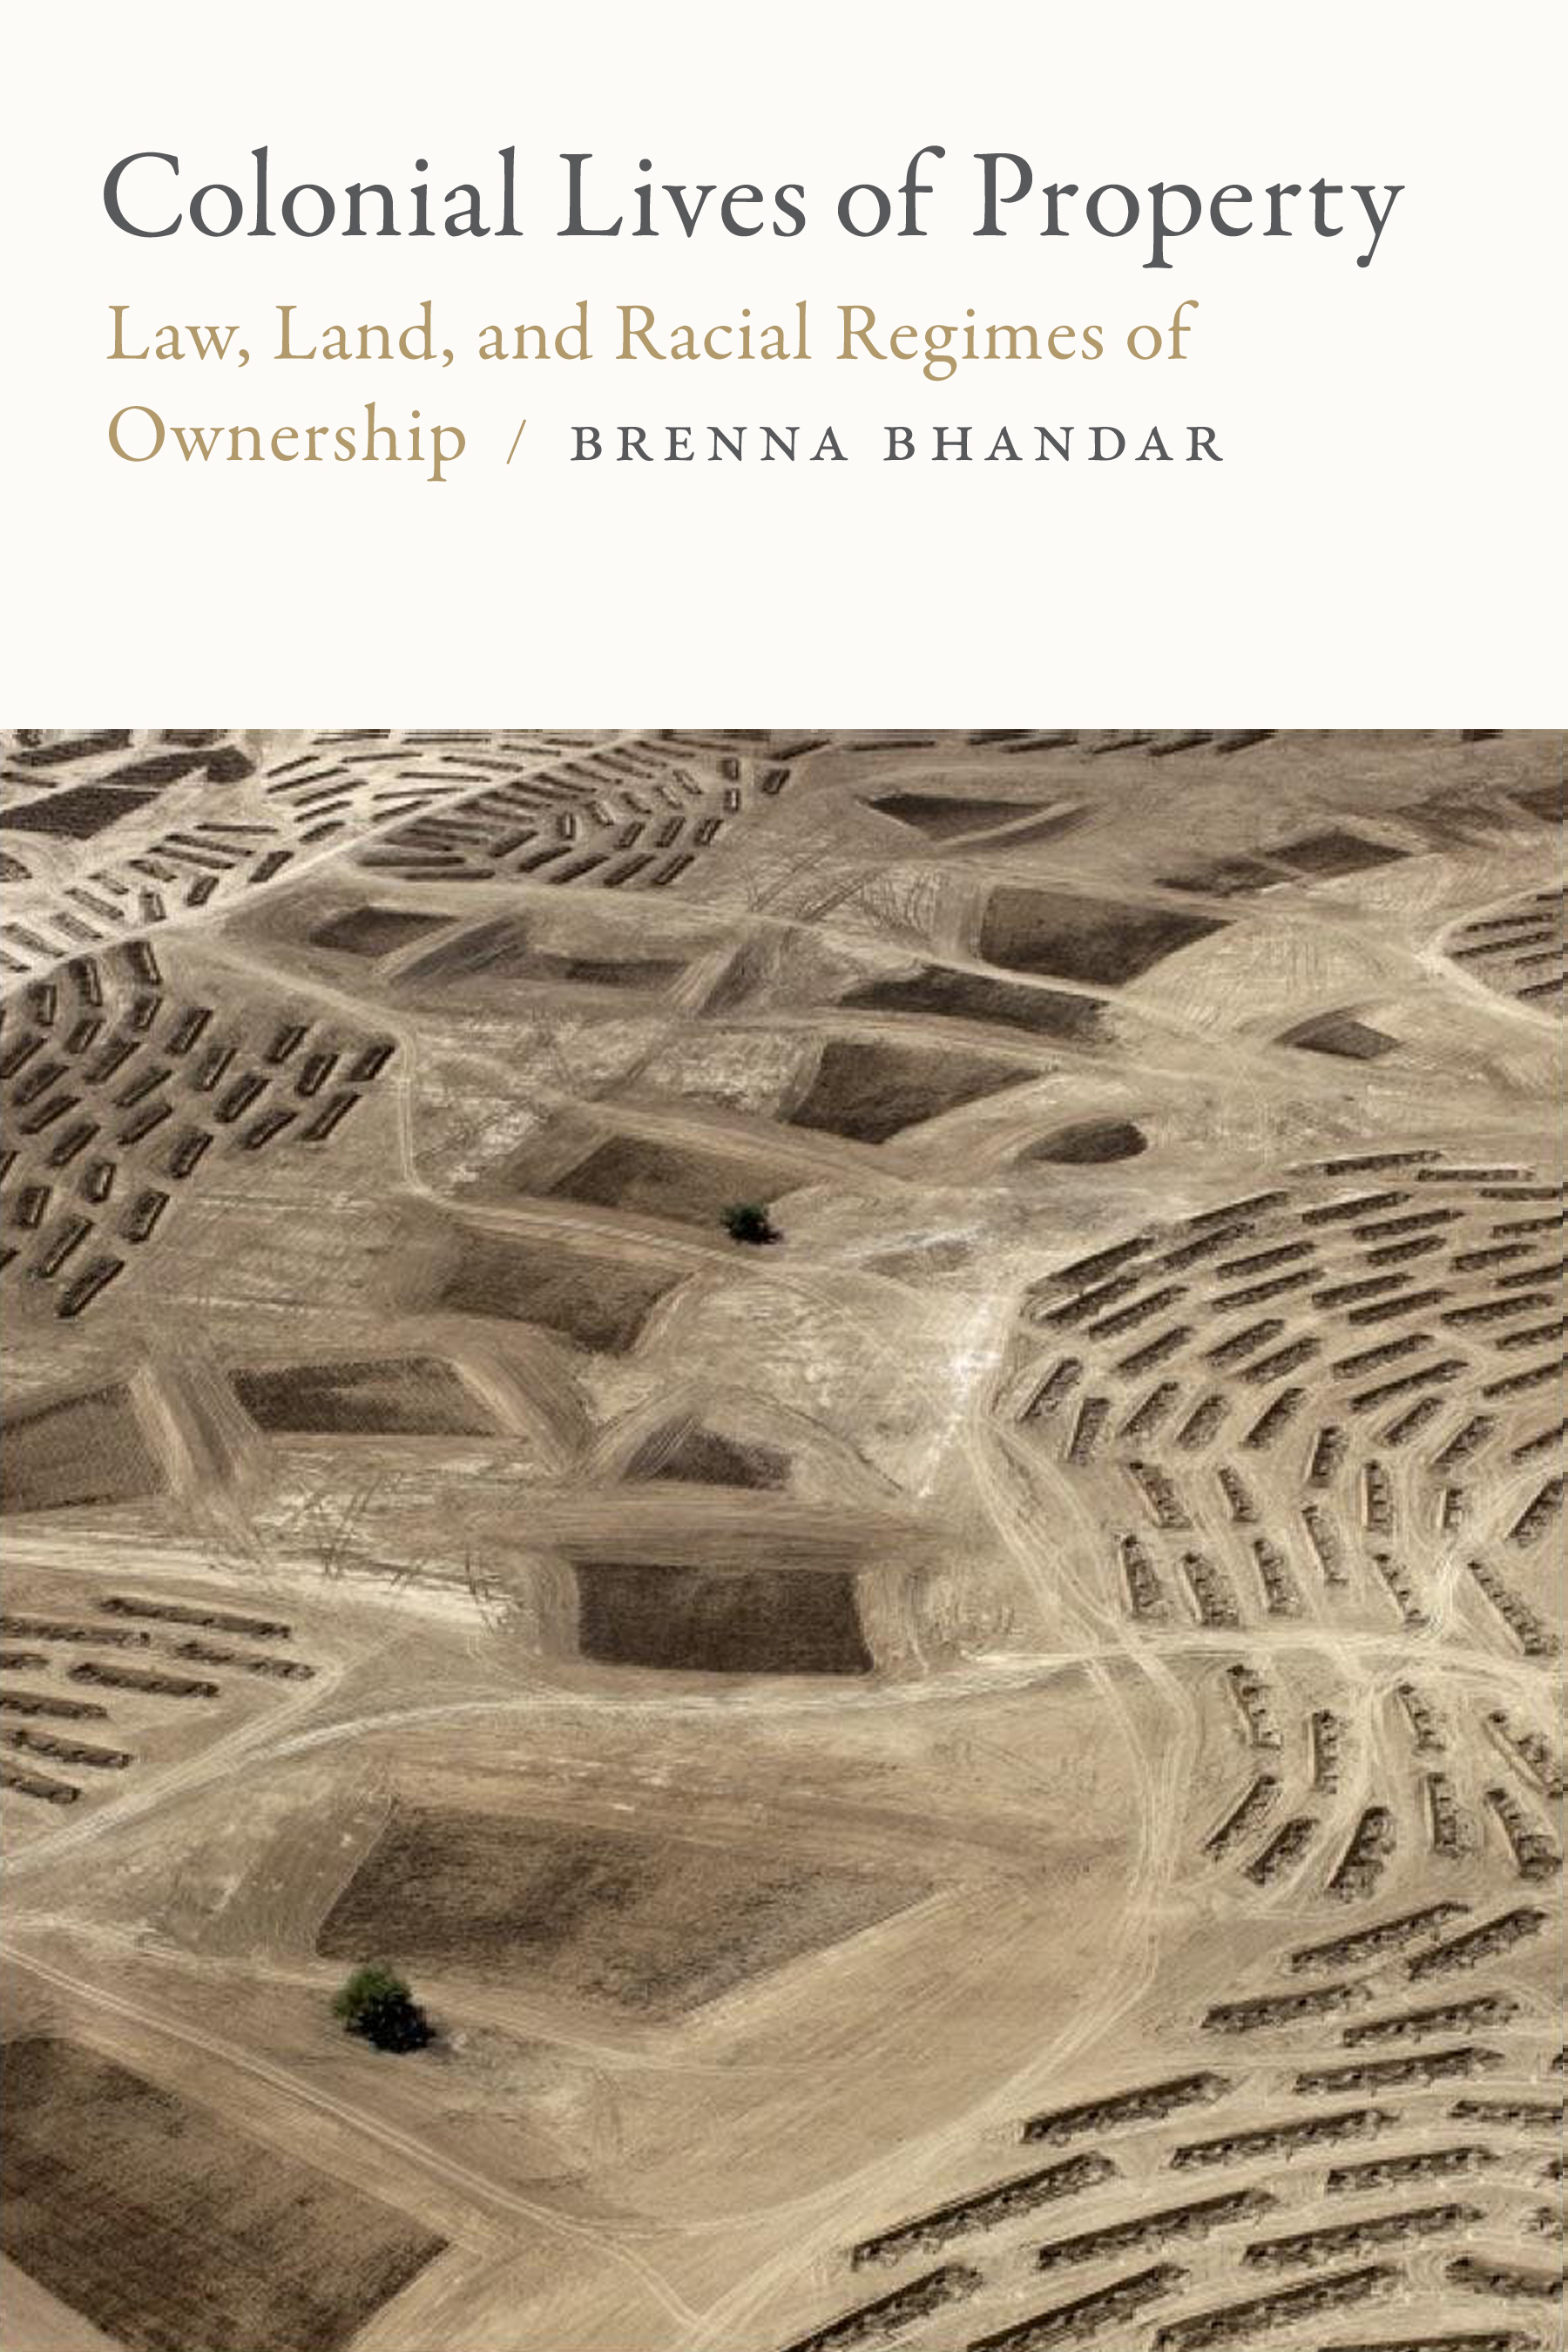 Book launch and talk Brenna Bhandar, Rafeef Ziadah Colonial Lives of Property:  Law, Land, and Racial Regimes of Ownership